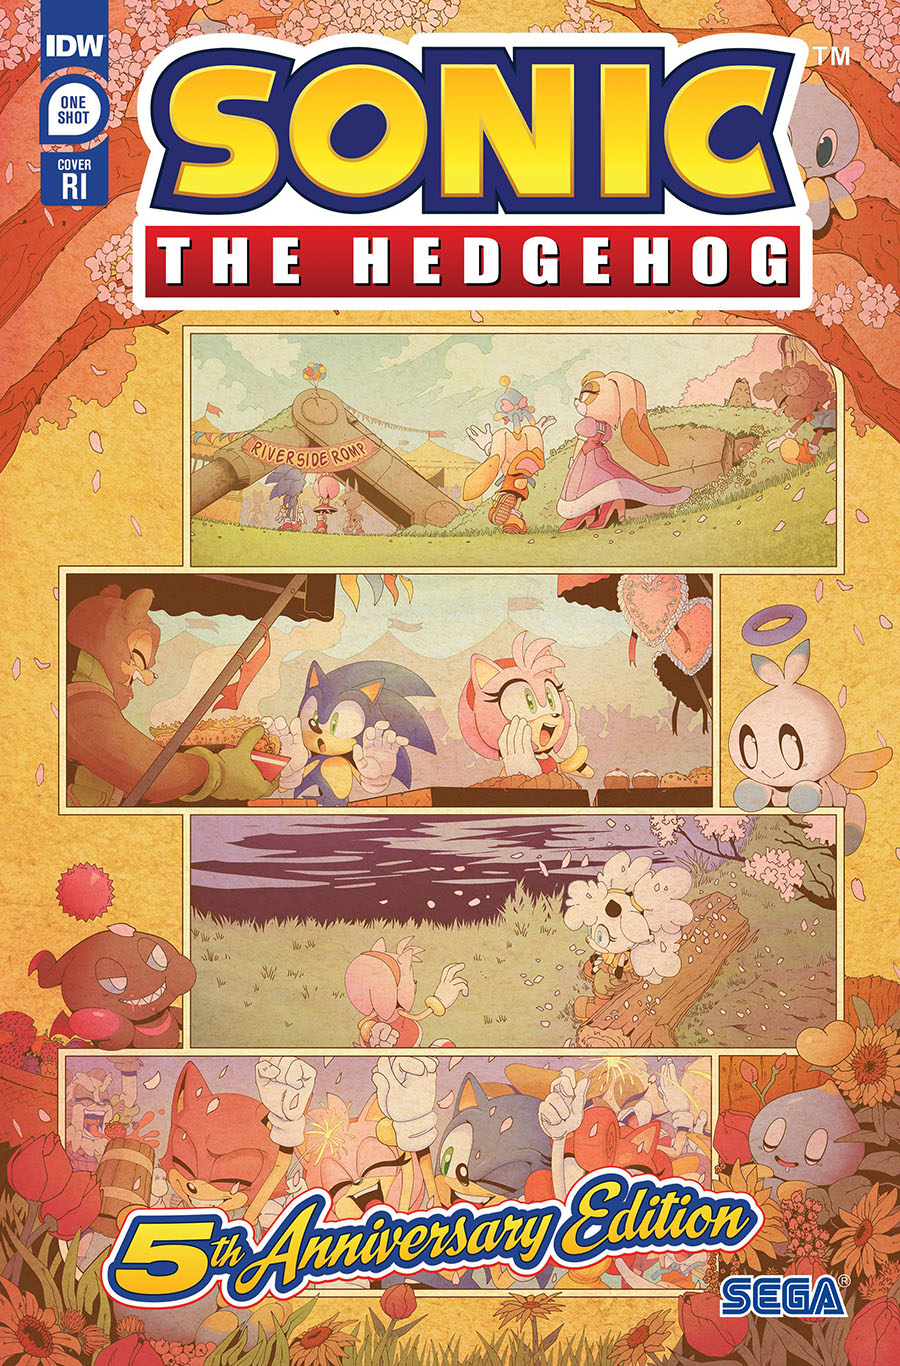 Sonic The Hedgehog Vol 3 #1 5th Anniversary Edition Cover E Incentive Adam Bryce Thomas Variant Cover